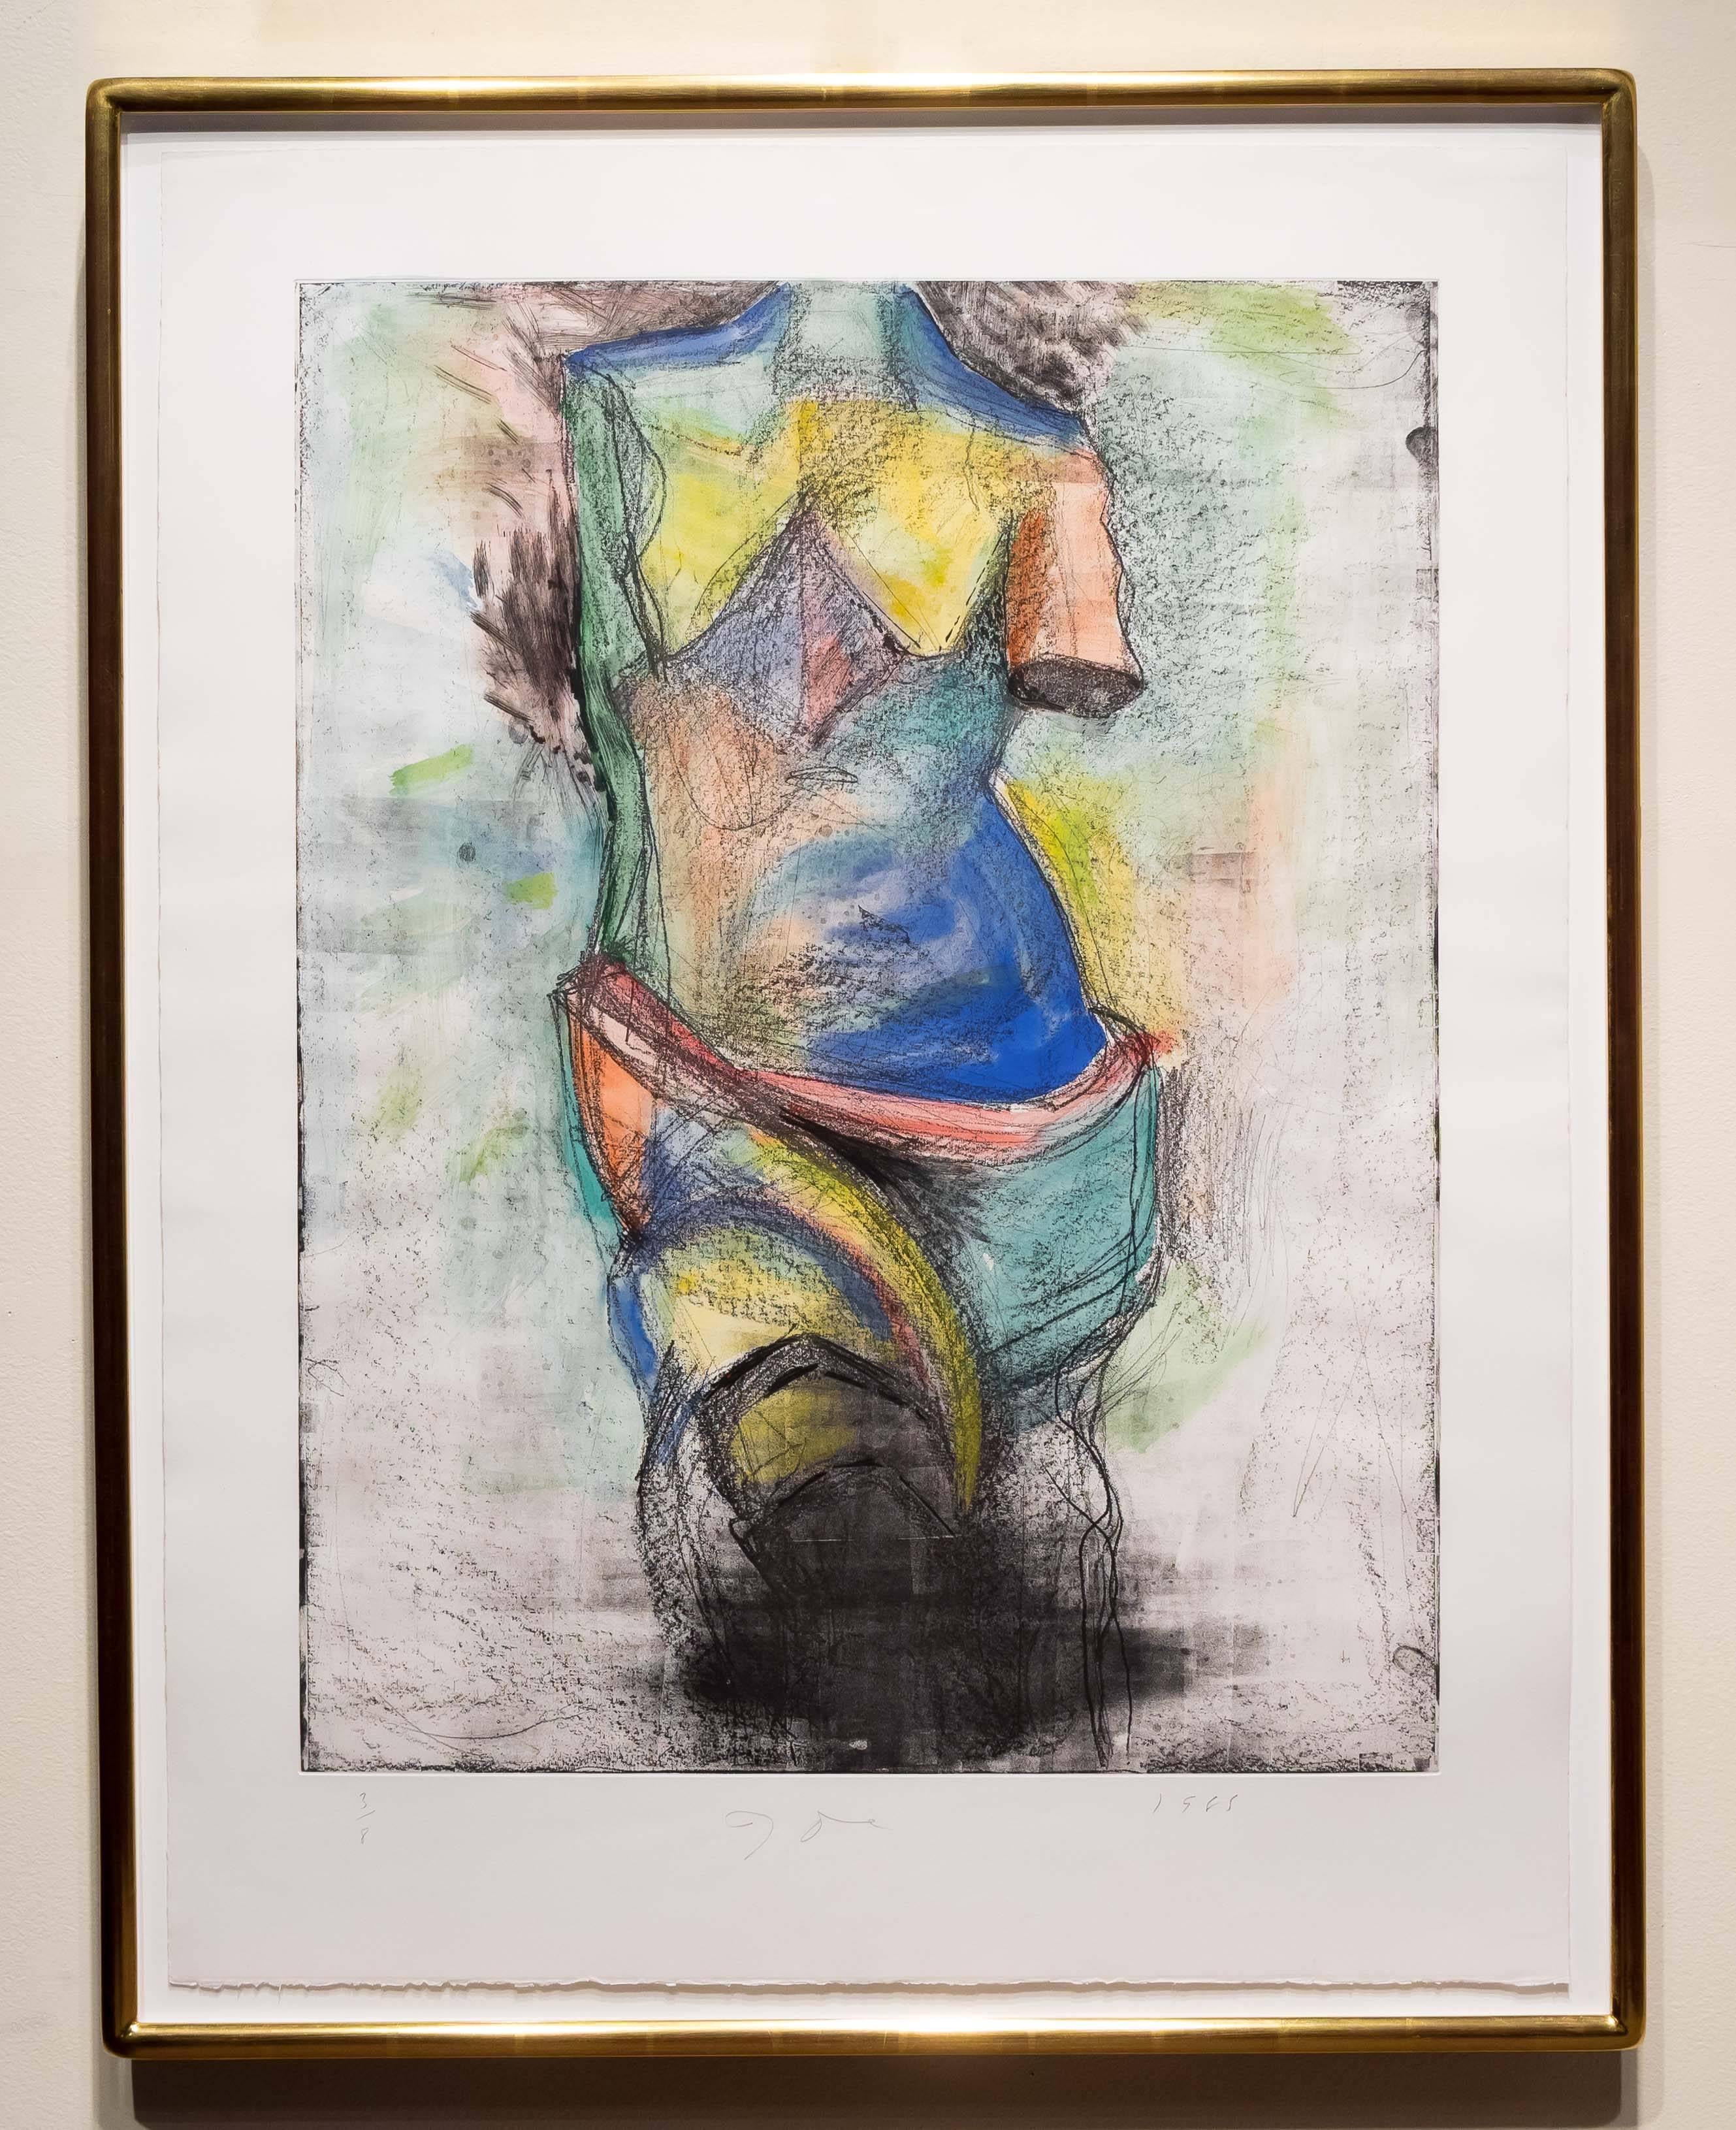 The French Watercolor Venus - Contemporary Print by Jim Dine